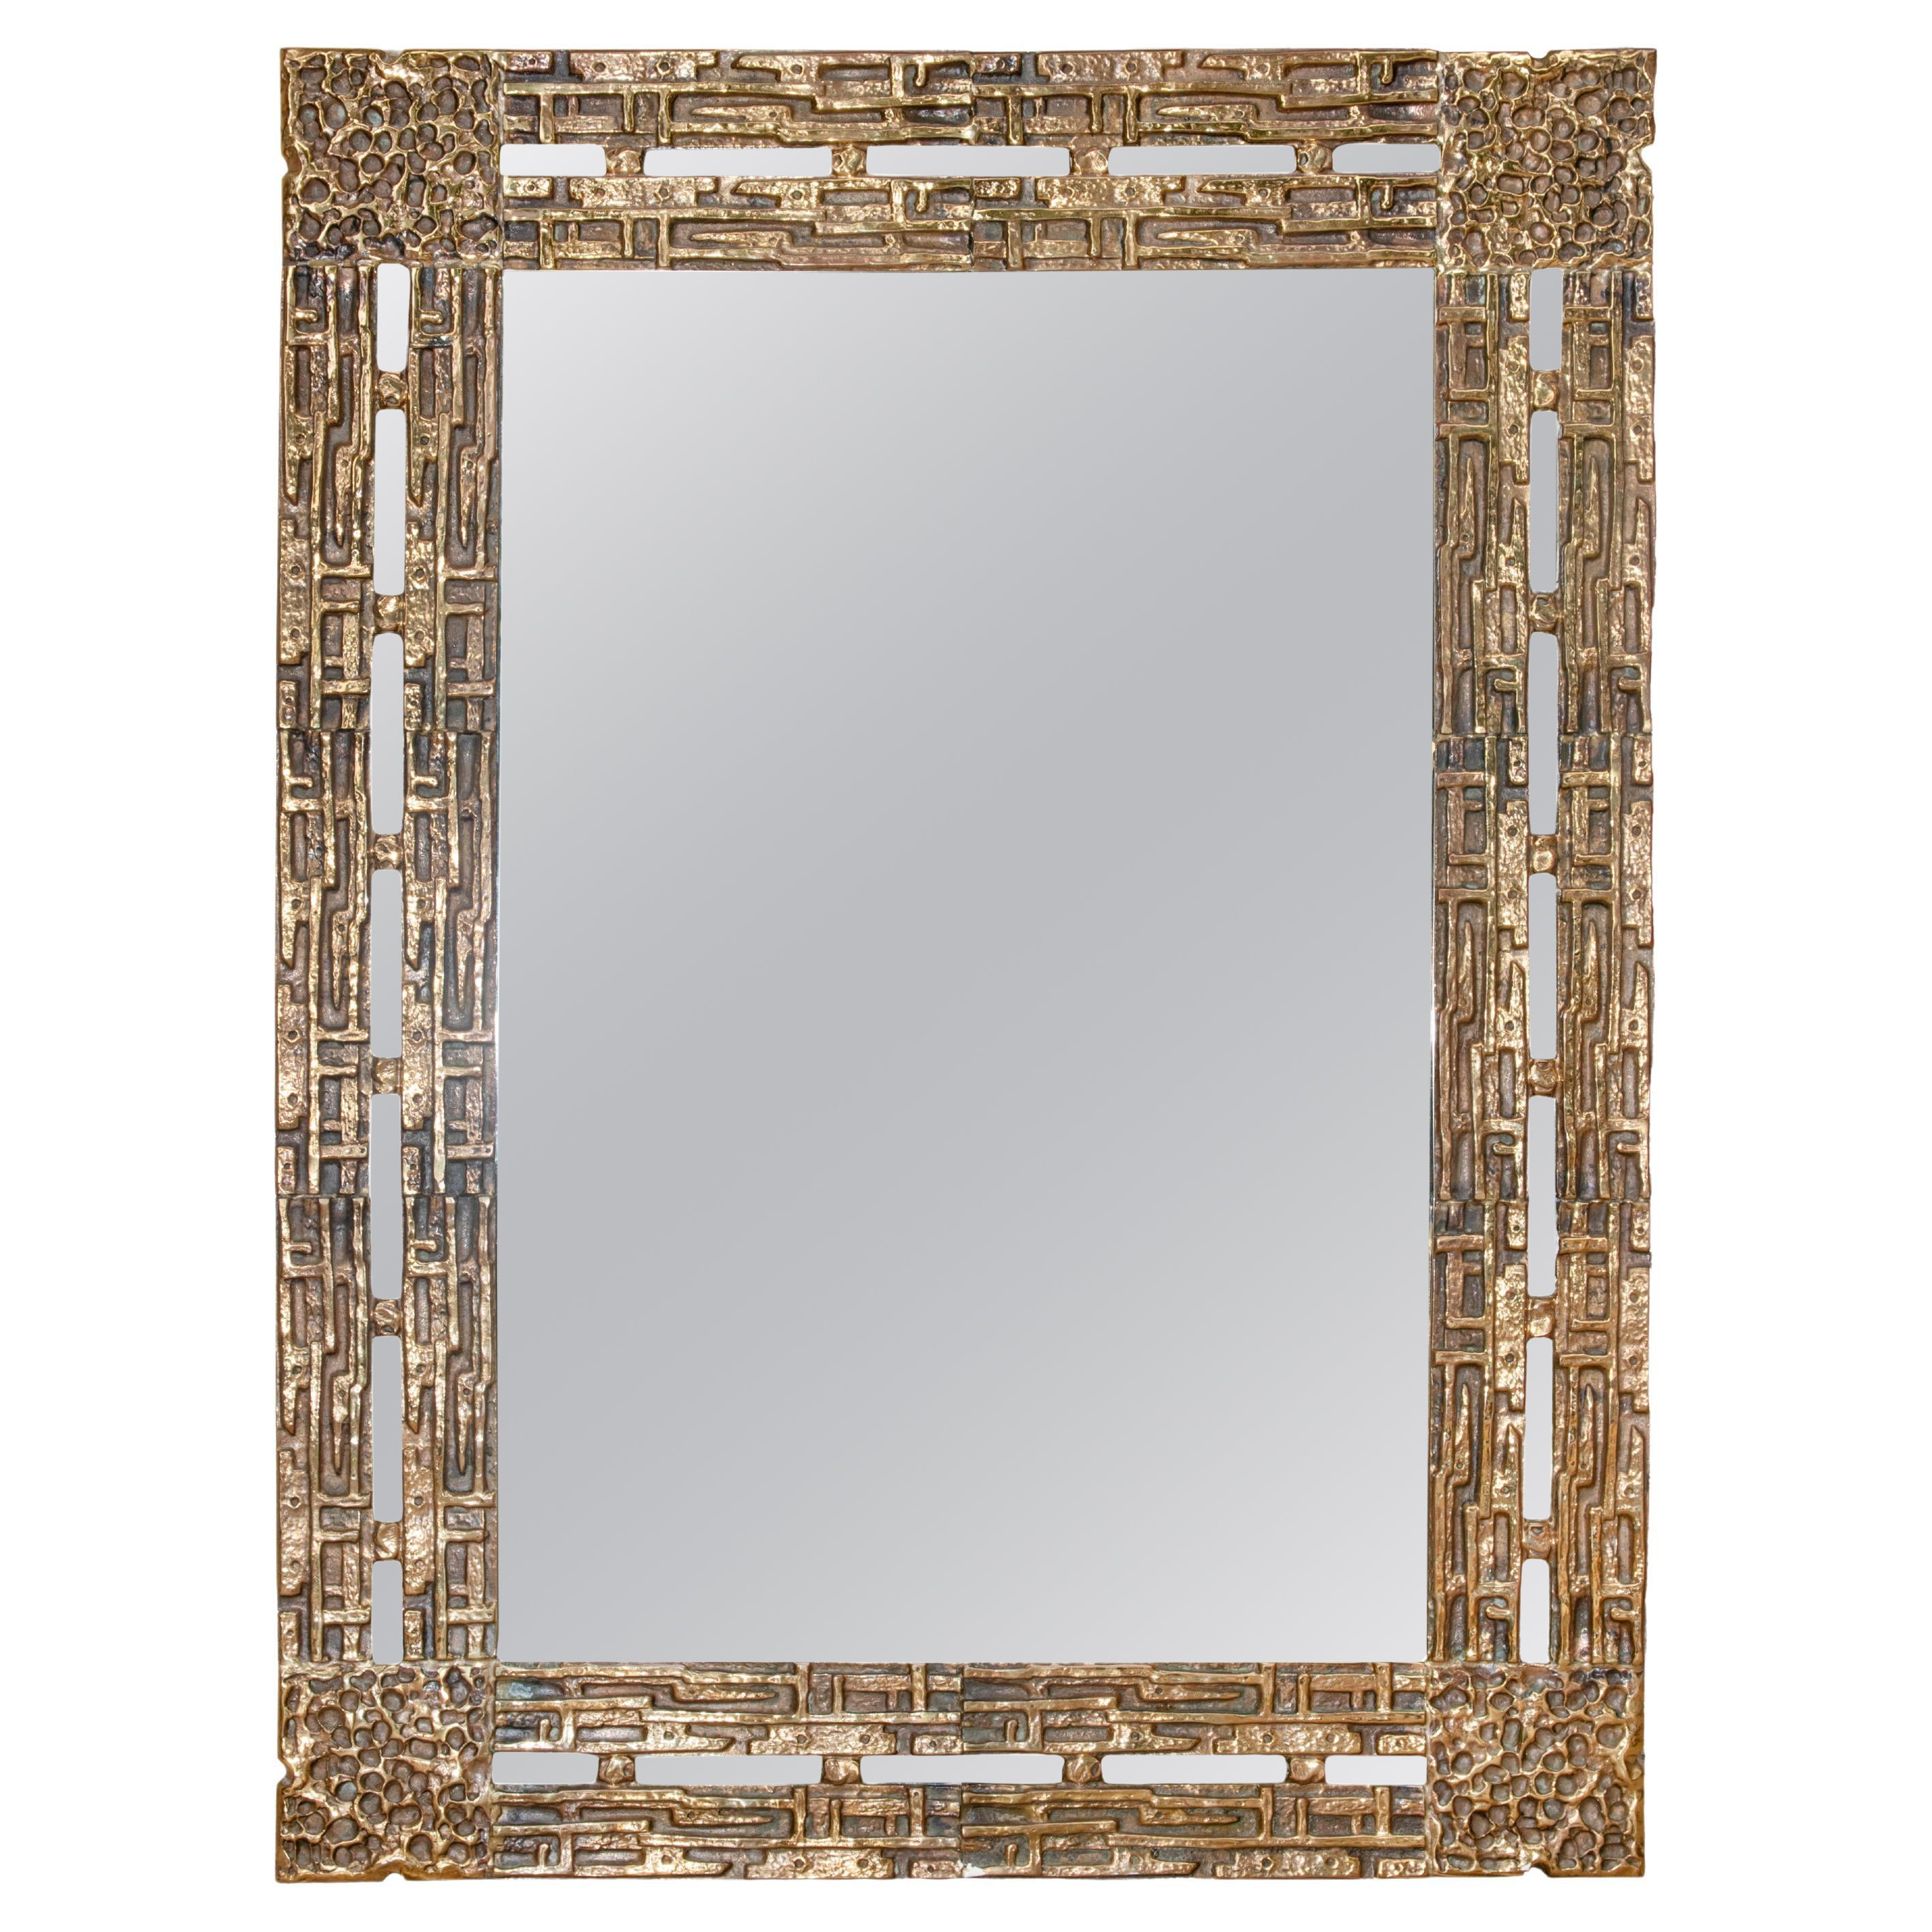 Vintage Brass Square Mirror by Luciano Frigerio, italian production, 1960s